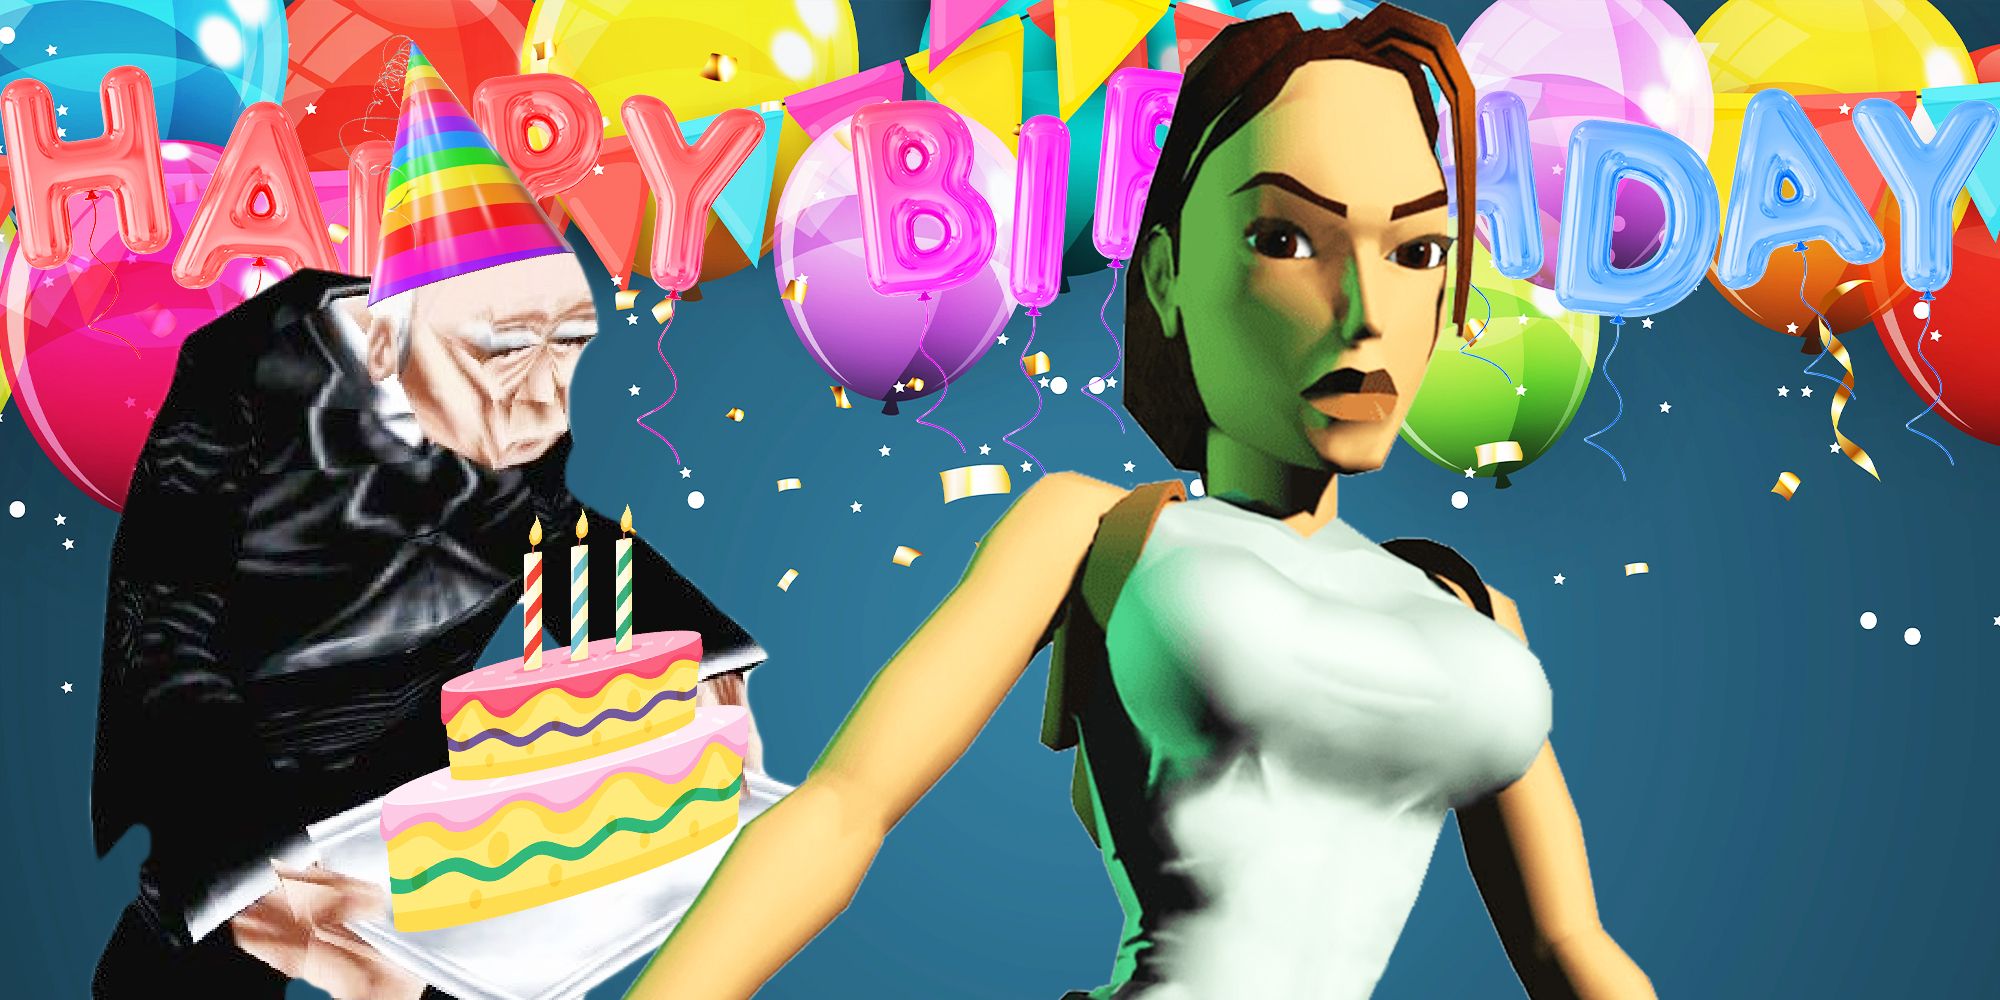 Lara Croft with a birthday sign and the butler carrying a birthday cake